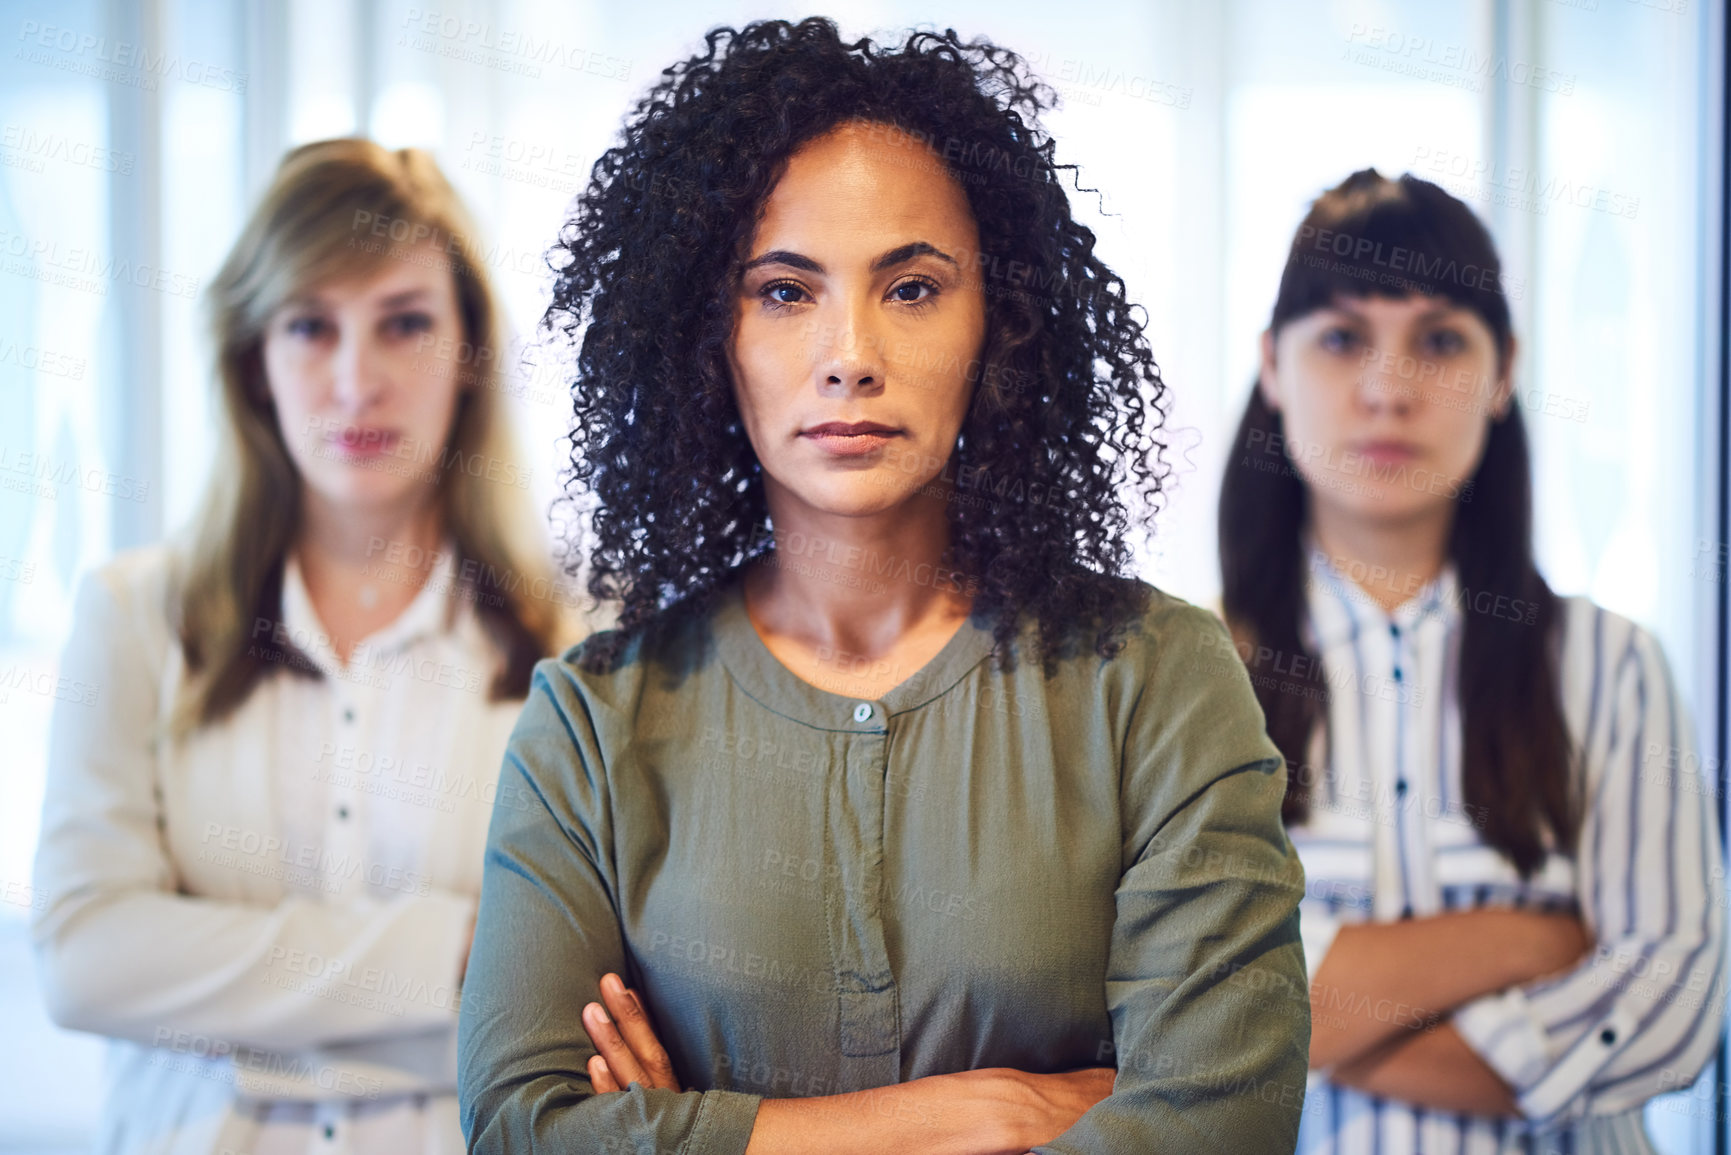 Buy stock photo Portrait of a group of businesswomen in the office